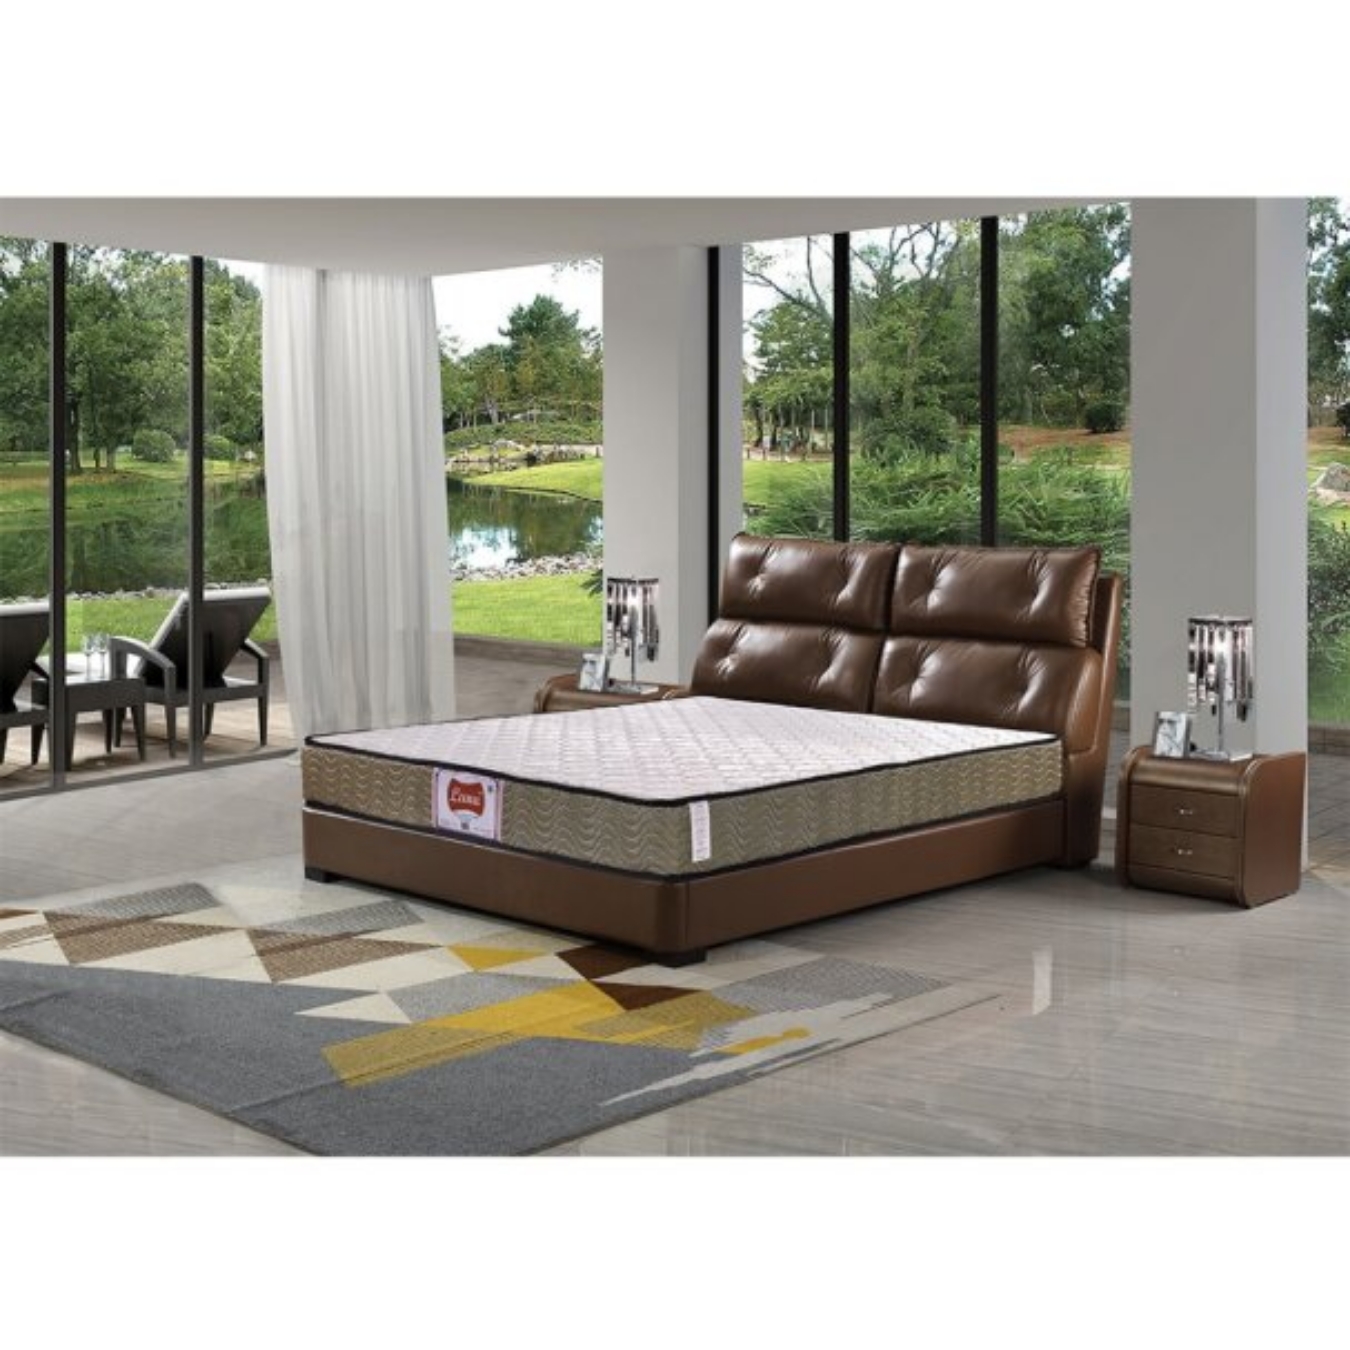 "Luna 138 Bonnell Spring Box-Queen" brings you amazing comfort in your sleeping times. 